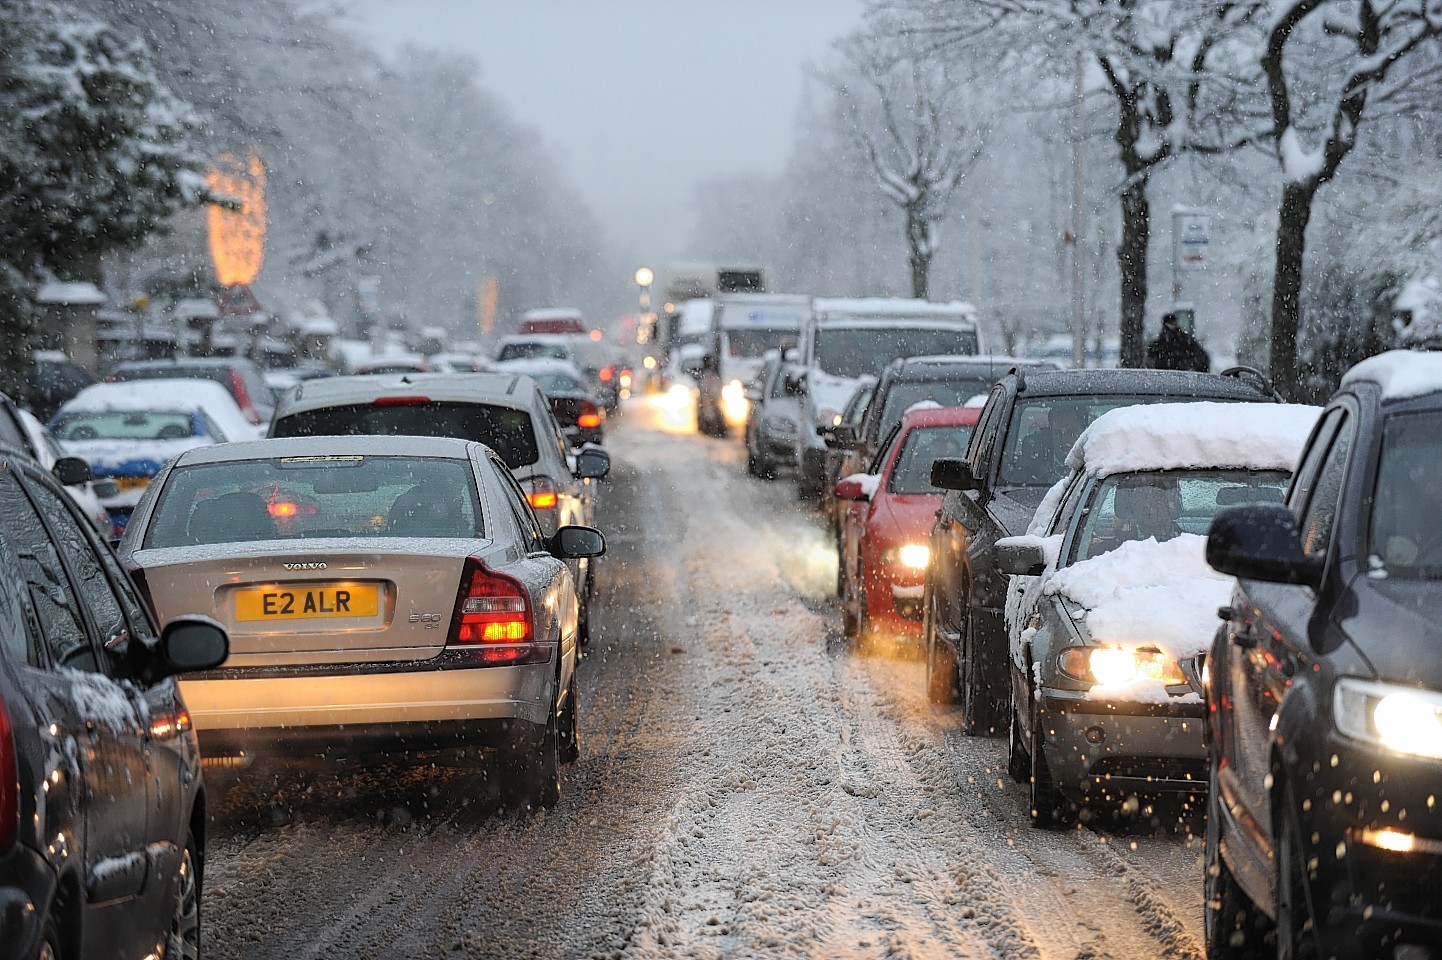 Police are warning drivers of the dangers of the winter weather